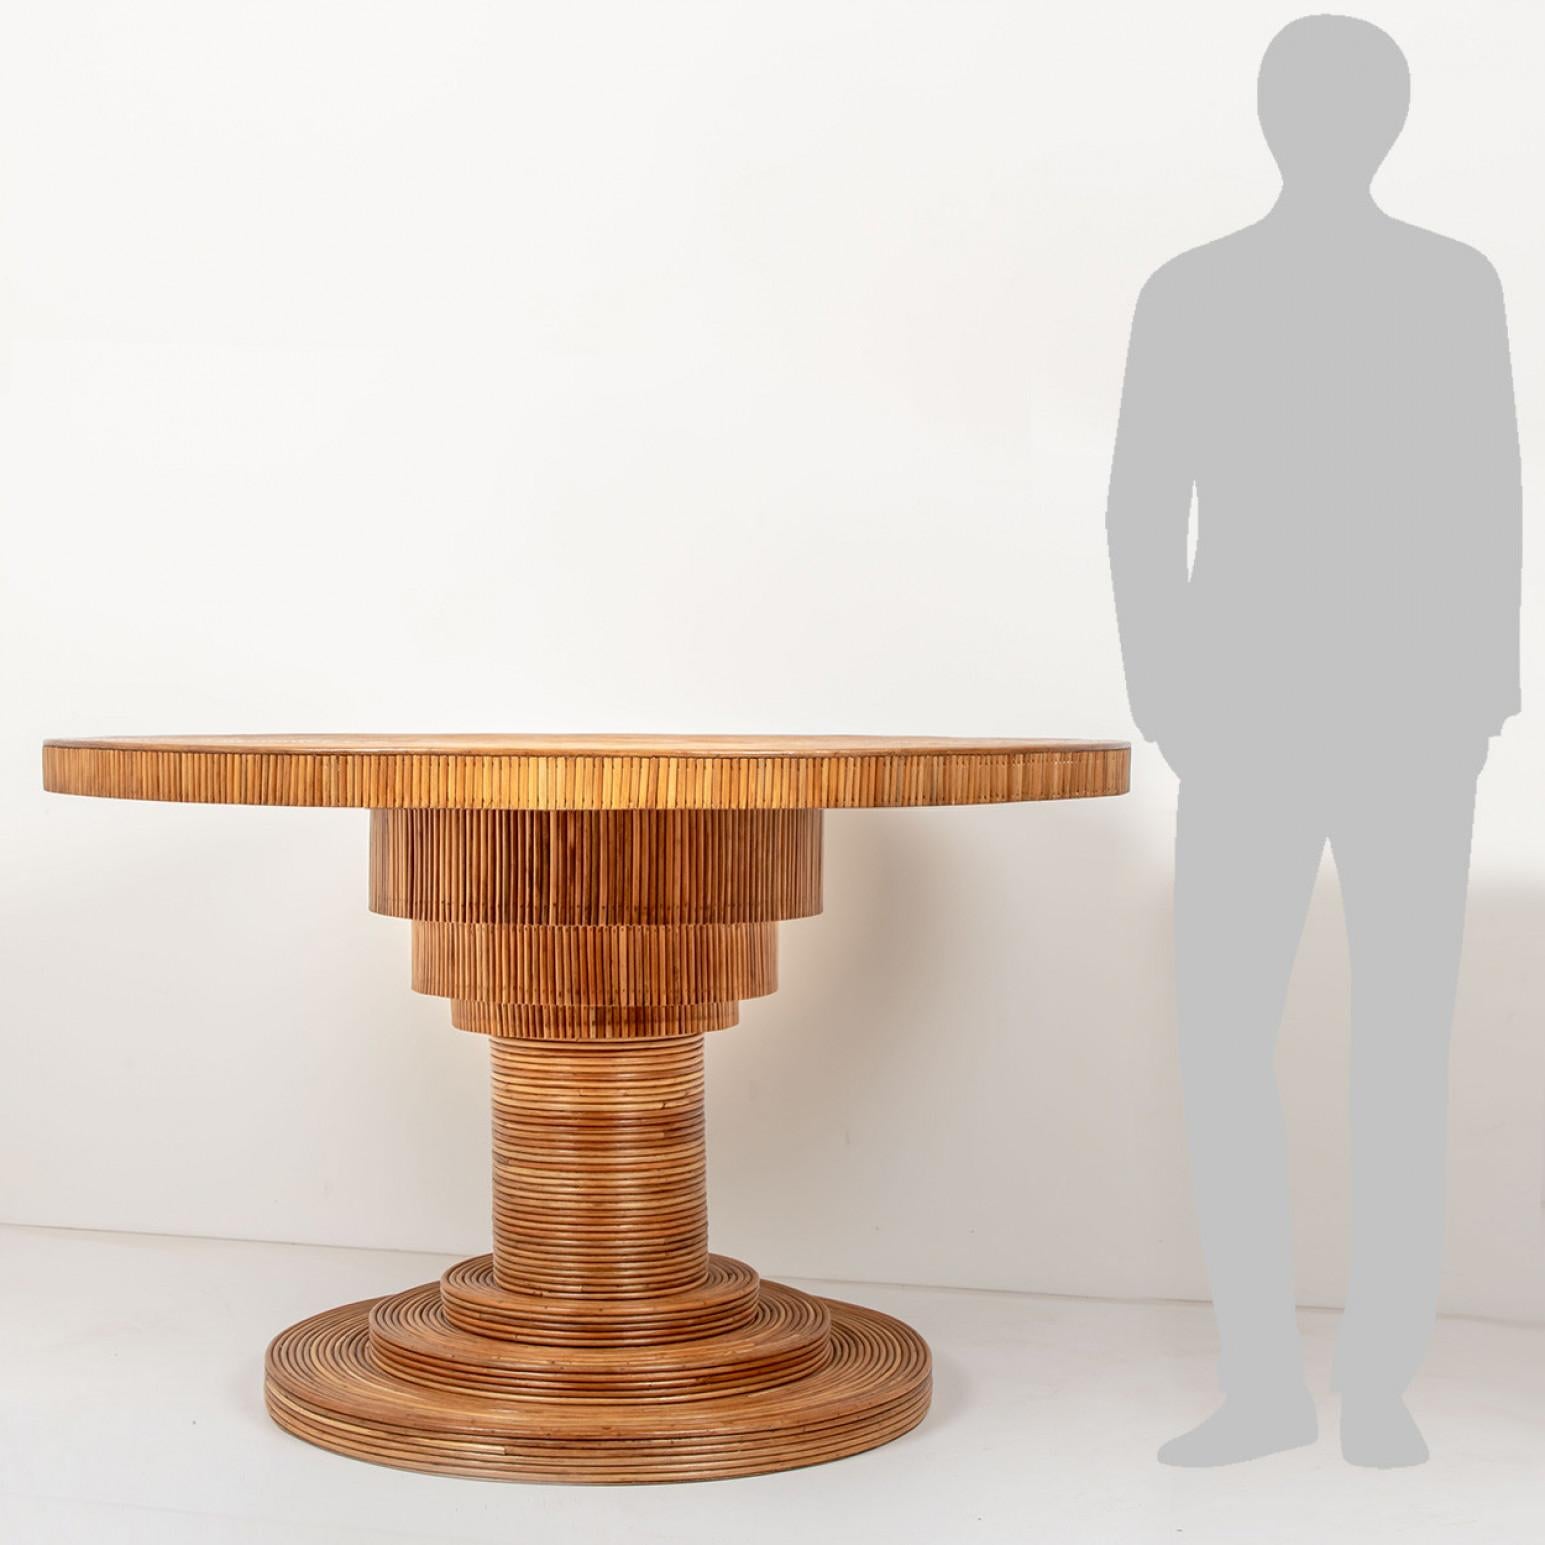 Wonderful shaped rattan dining Table by the Dutch artist Rene Houben. A real work of art.

Diameter 120 cm/47,2 inch  Height 29.5 inch/75 cm  Table Top Height 2,6 inch/5.5 cm Diameter floor base 30 inch/75 cm

Bespoke dimensions on request. Feel